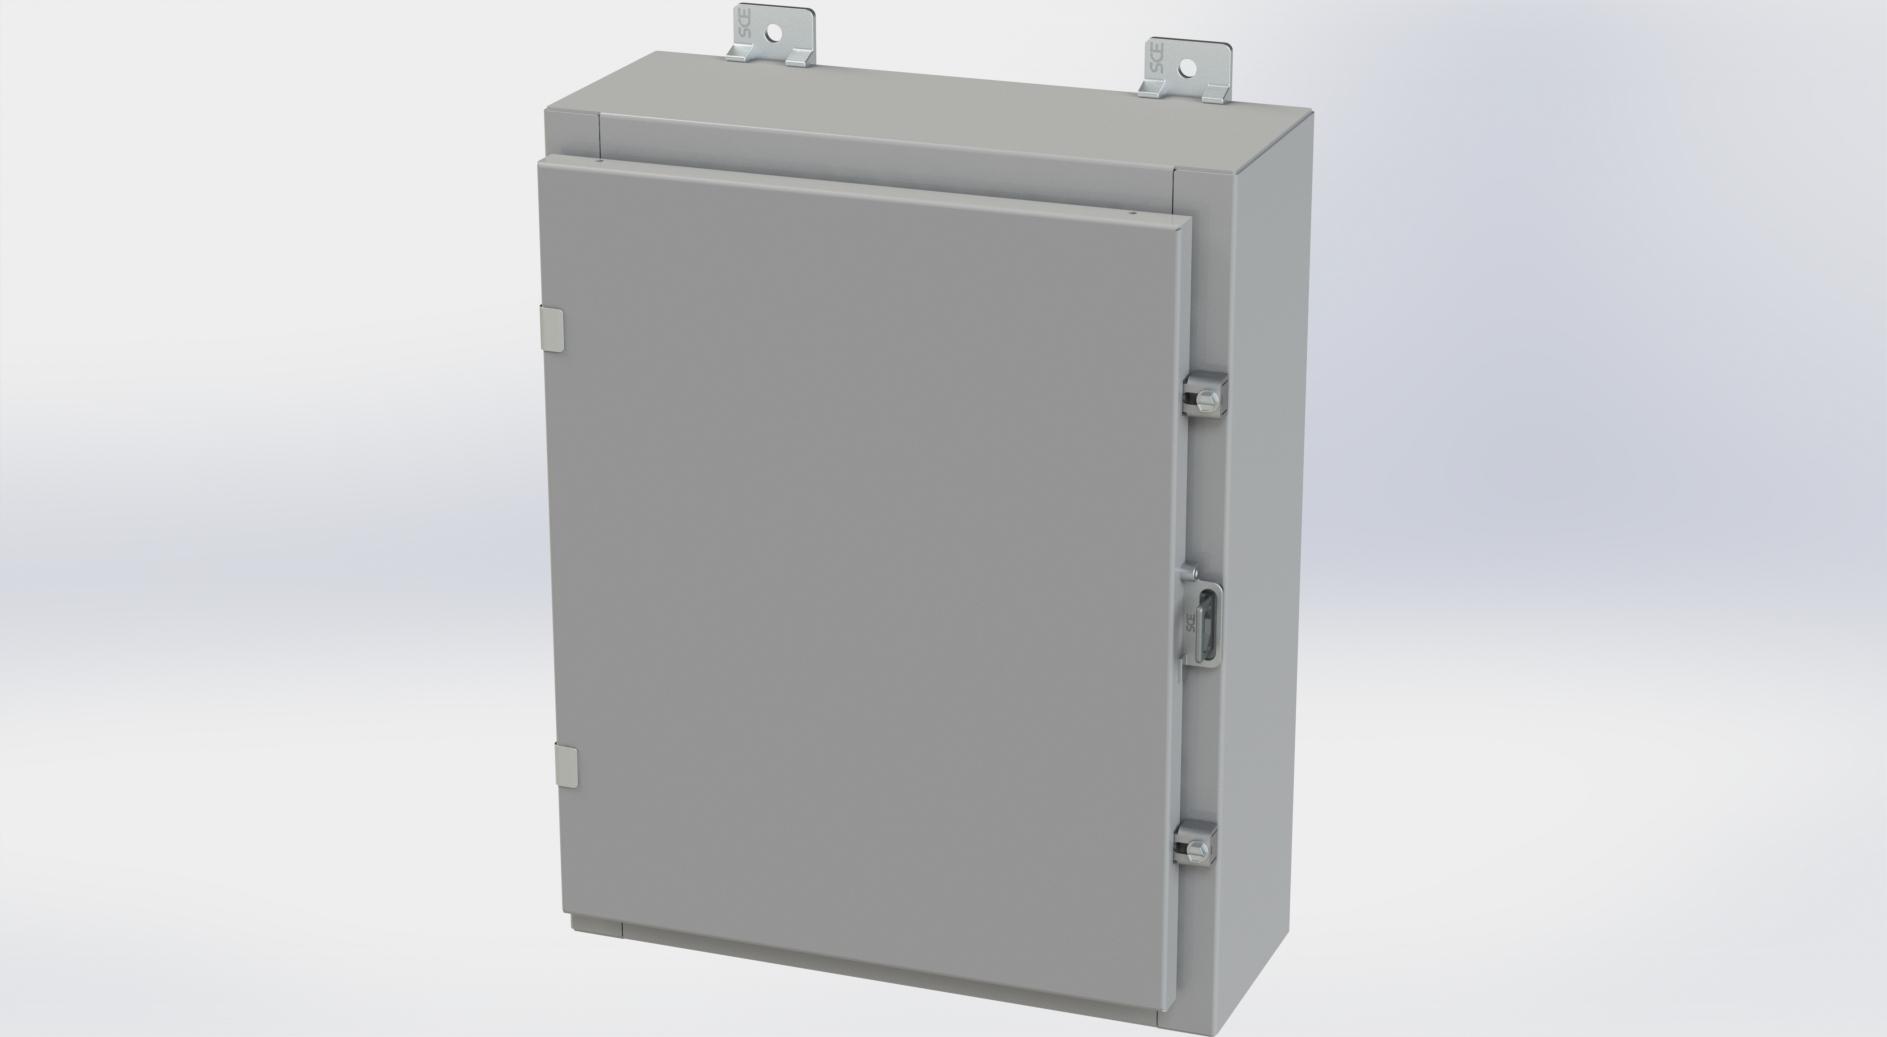 Saginaw Control SCE-20H1606LP Nema 4 LP Enclosure, Height:20.00", Width:16.00", Depth:6.00", ANSI-61 gray powder coating inside and out. Optional panels are powder coated white.